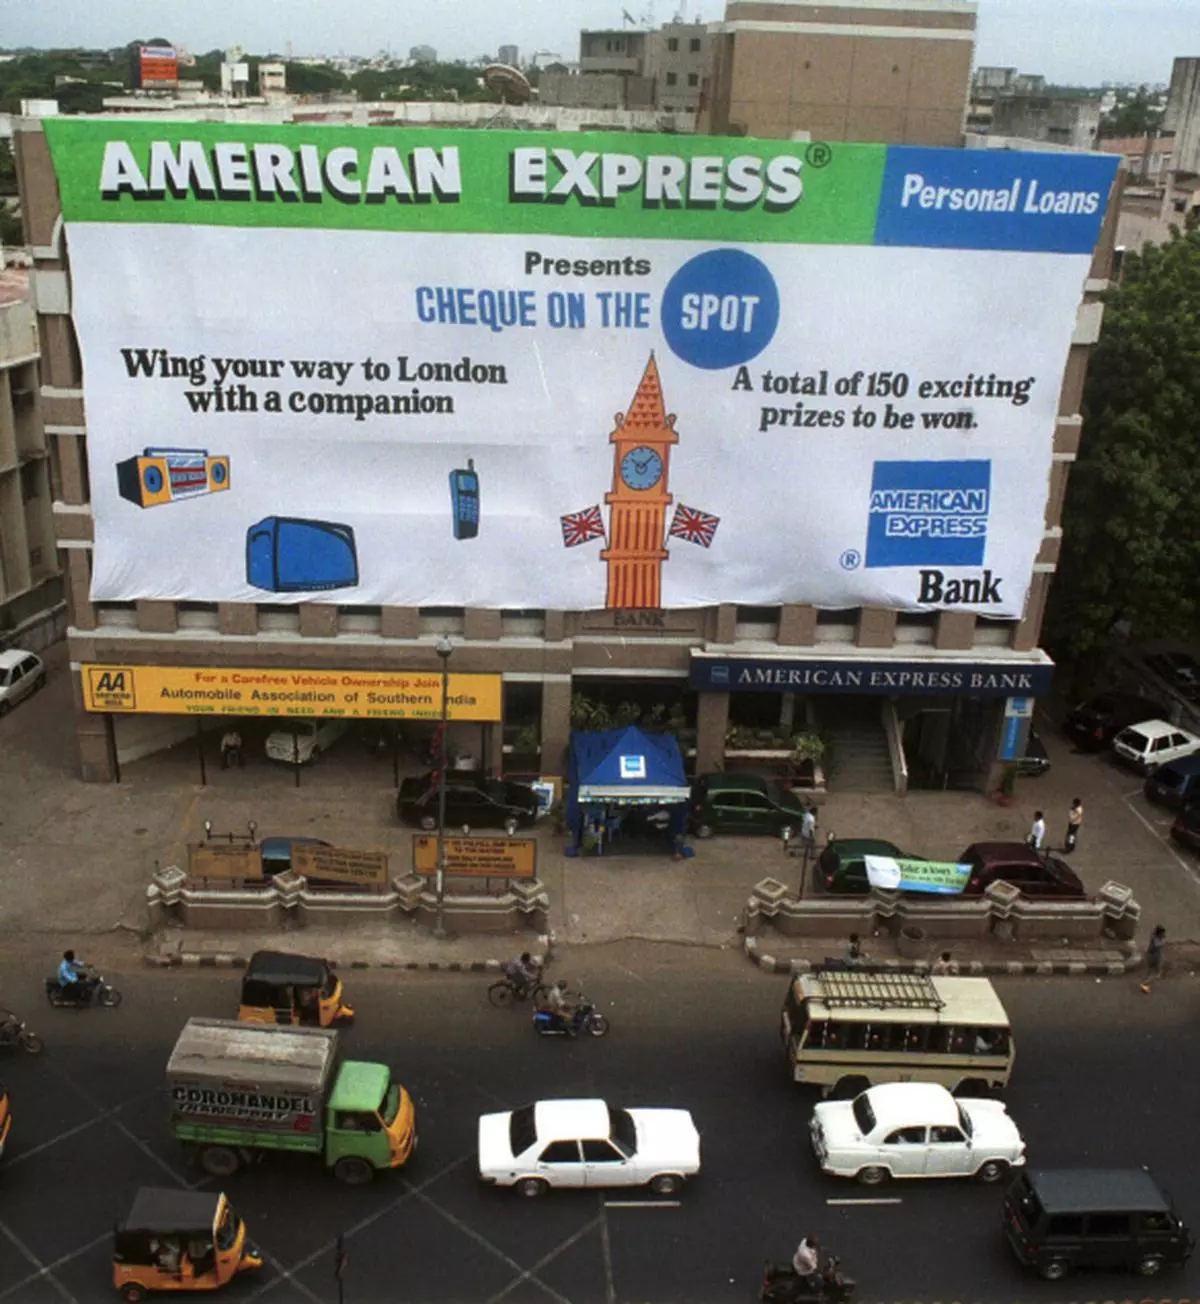 American Express to cut 5,400 jobs, Business and Economy